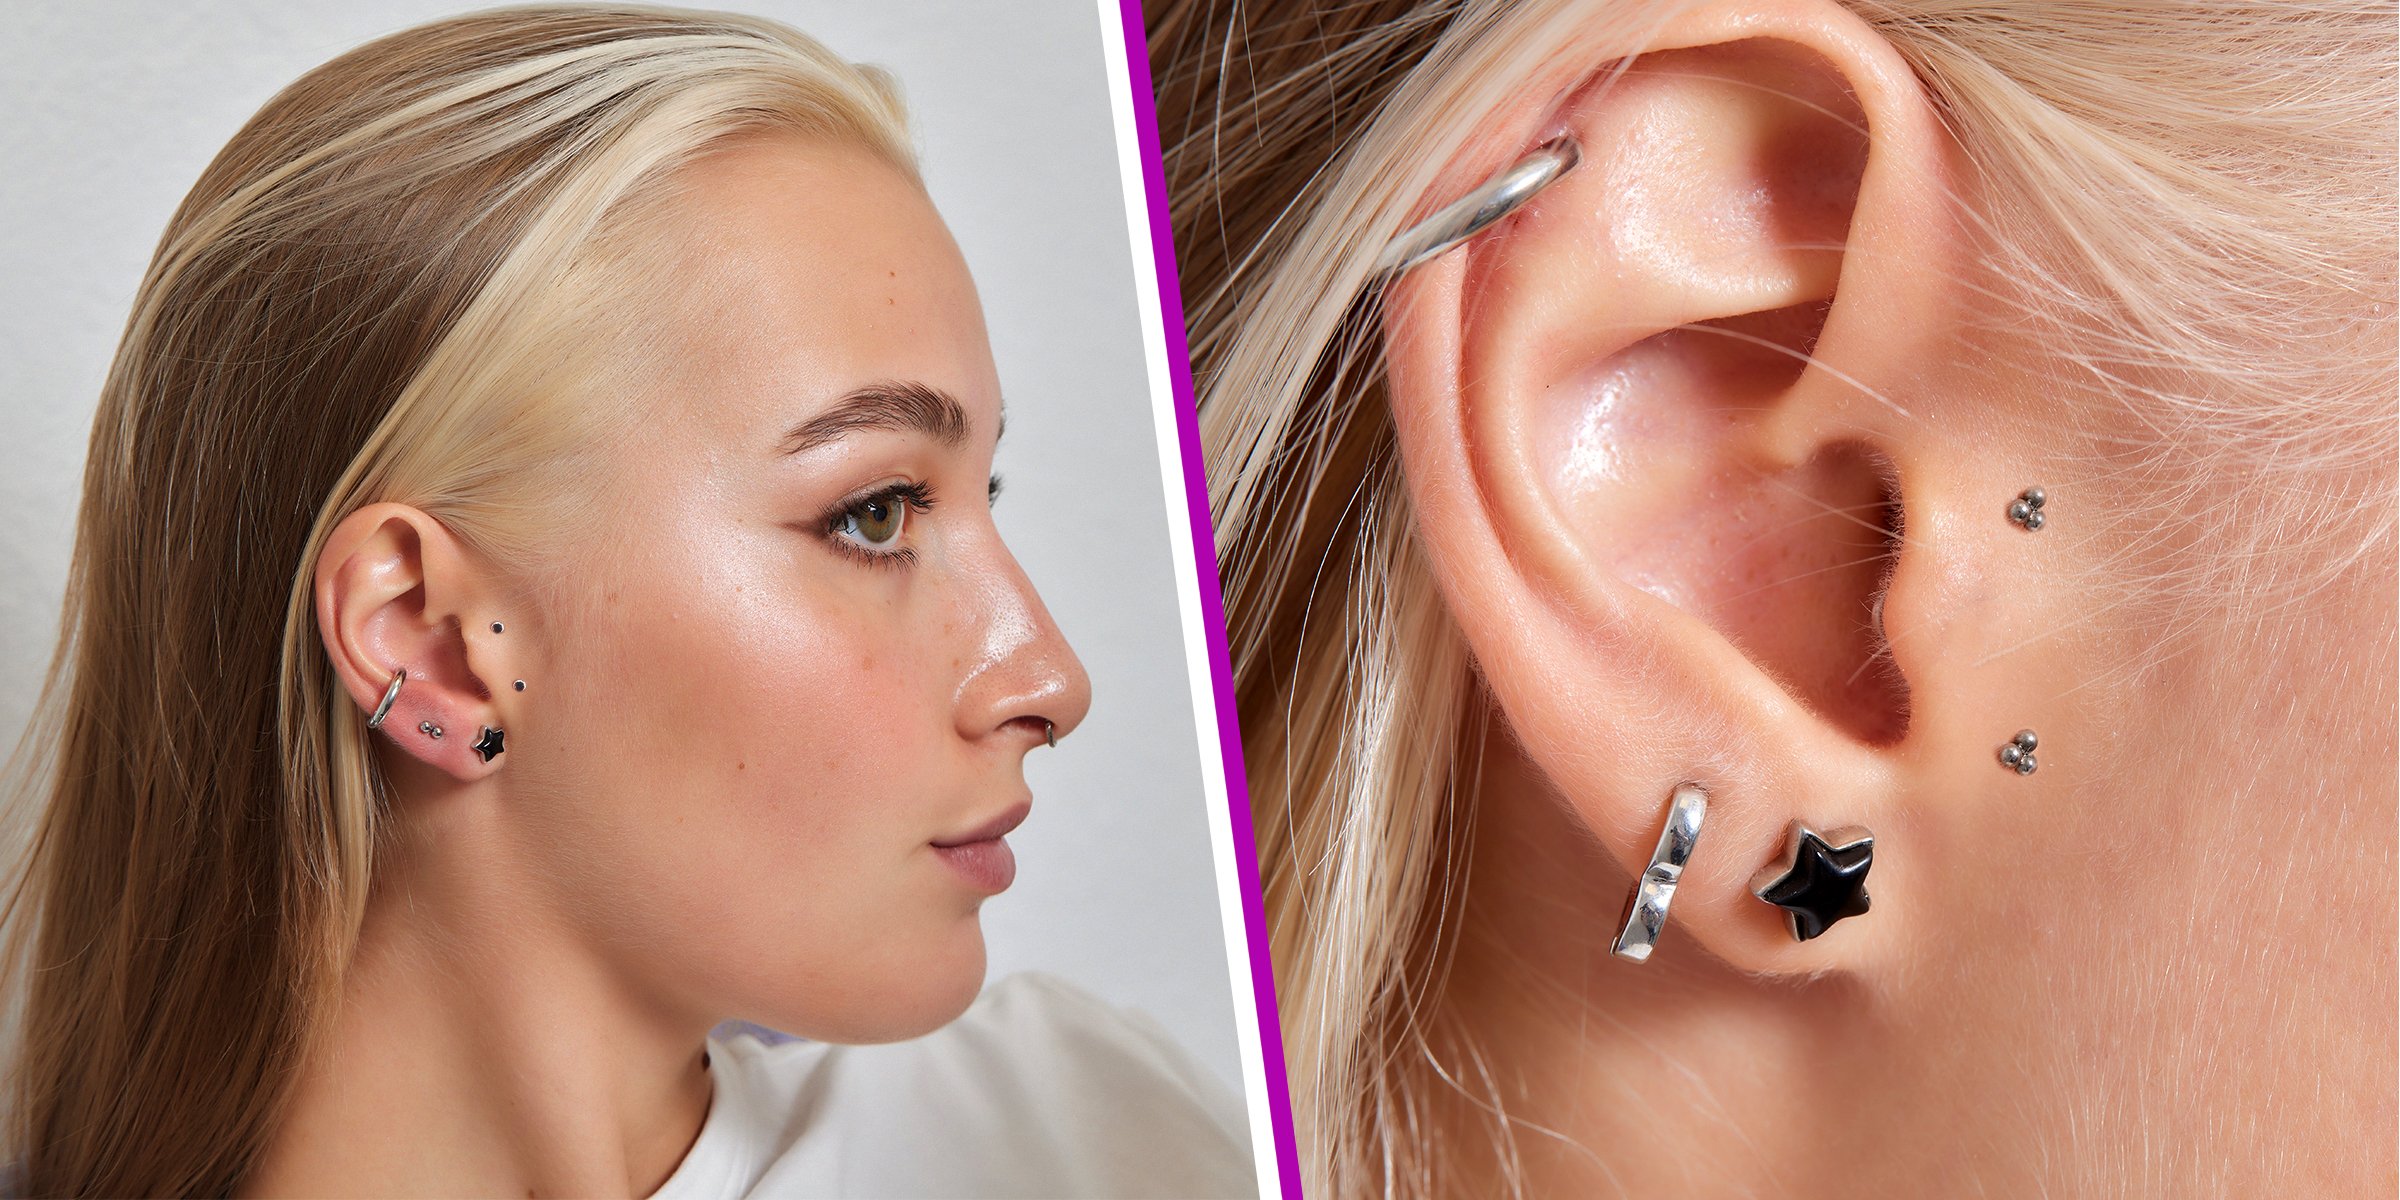 A model with a surface tragus piercing. l Source: Shutterstock.com